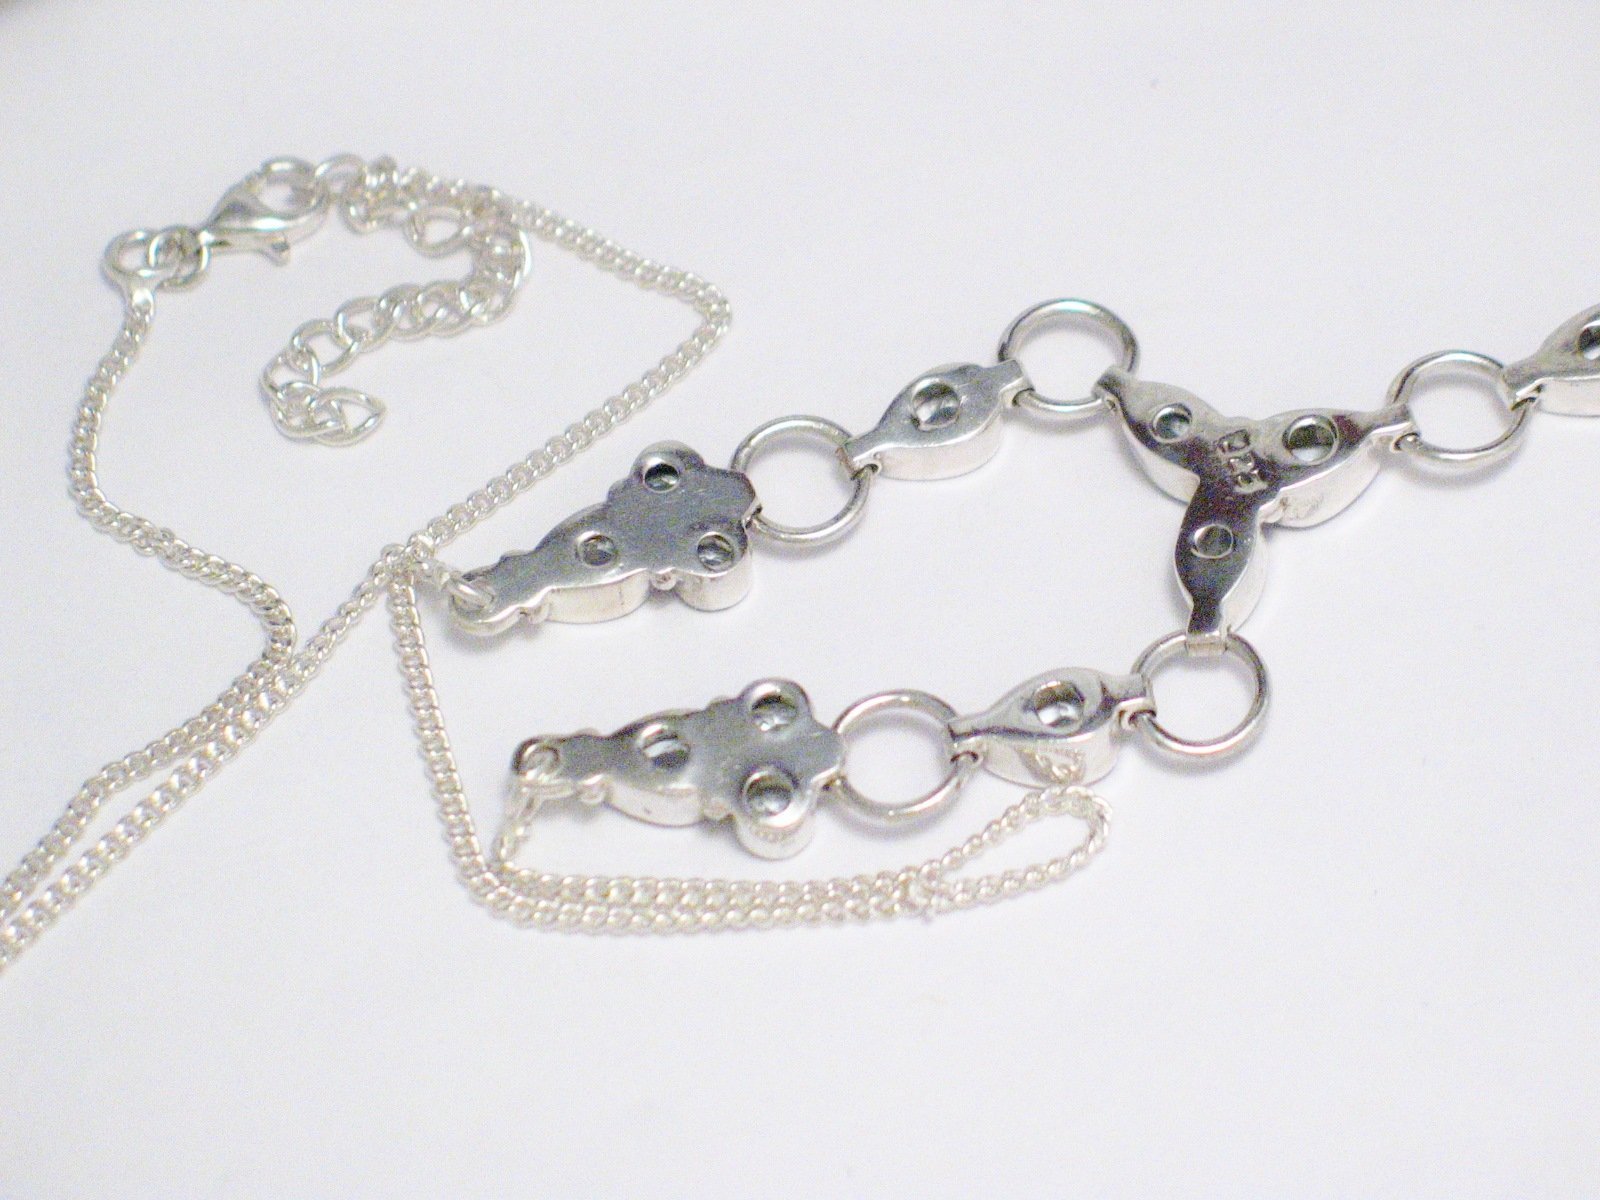 Lavaliere Chain Necklace Sterling Silver w/ Aquamarine Stones 16-18" - Blingschlingers Jewelry